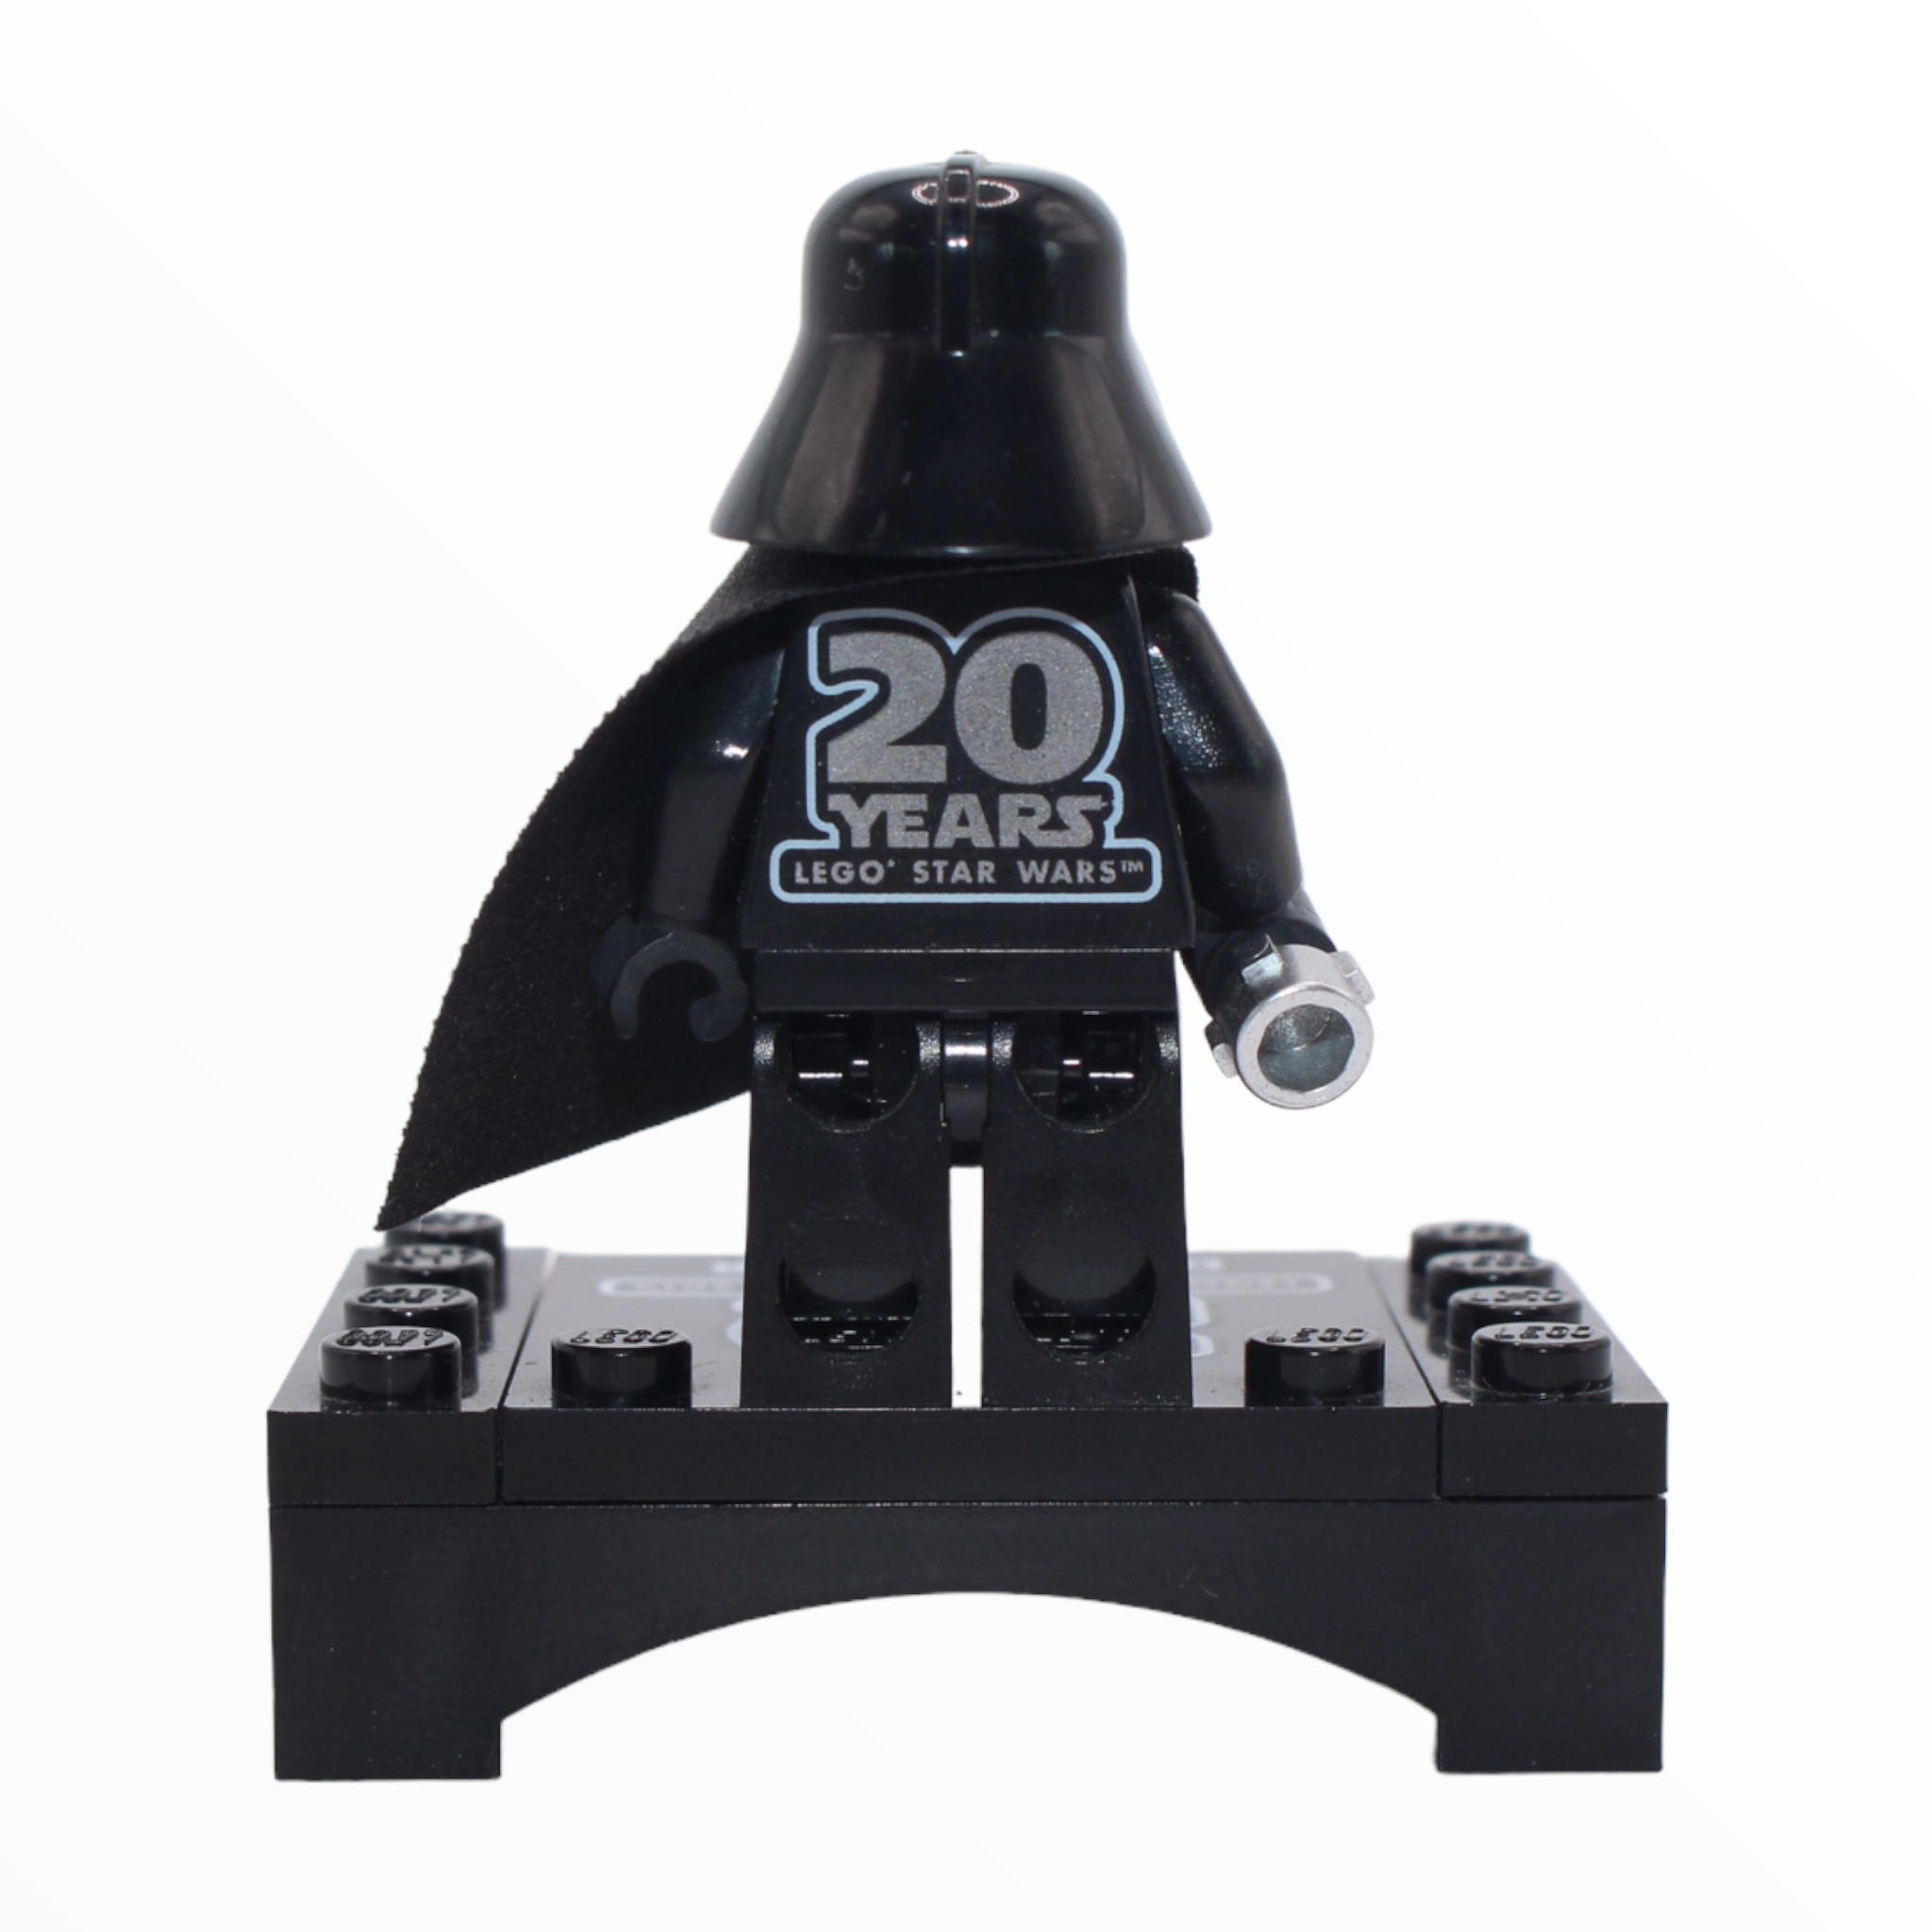 Darth Vader (20th Anniversary, with stand and lightsaber)